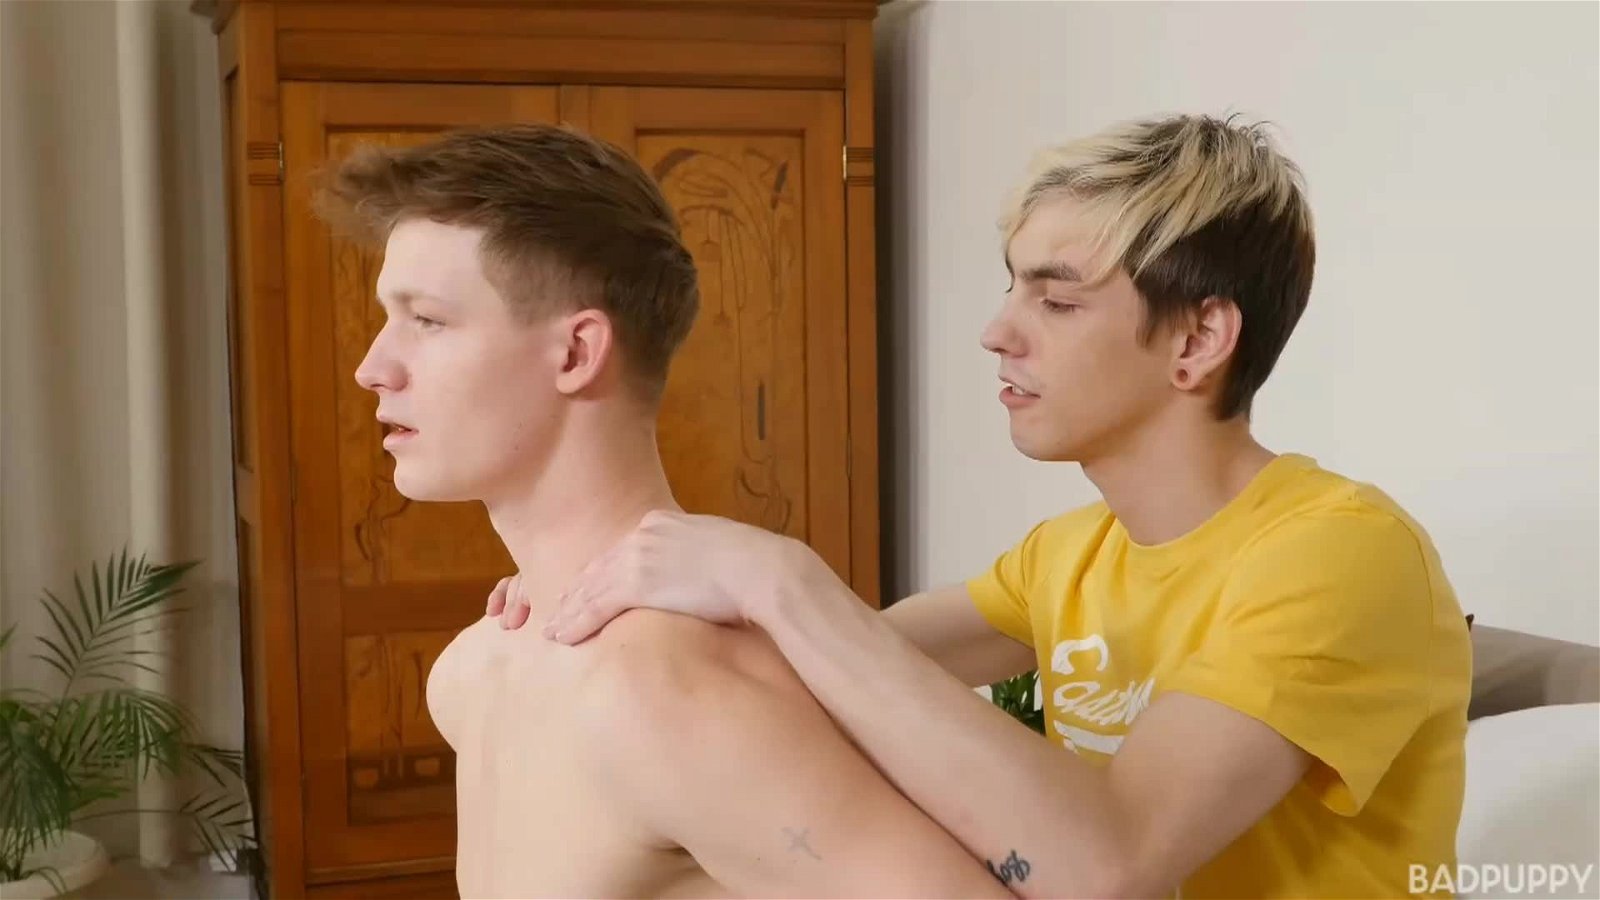 Video by BadpuppyOfficial with the username @BadpuppyOfficial, who is a brand user,  March 12, 2024 at 2:58 PM. The post is about the topic Gay Porn and the text says 'Beno uses his tongue and his hand on Antony’s massive, uncut cock
https://www.badpuppy.com/tour/trailers/Beno-and-Antony.html
#fitlads #gayfit #gay #gaytwinks #muscles #twink #hunk #jock #uncut #helpinghand'